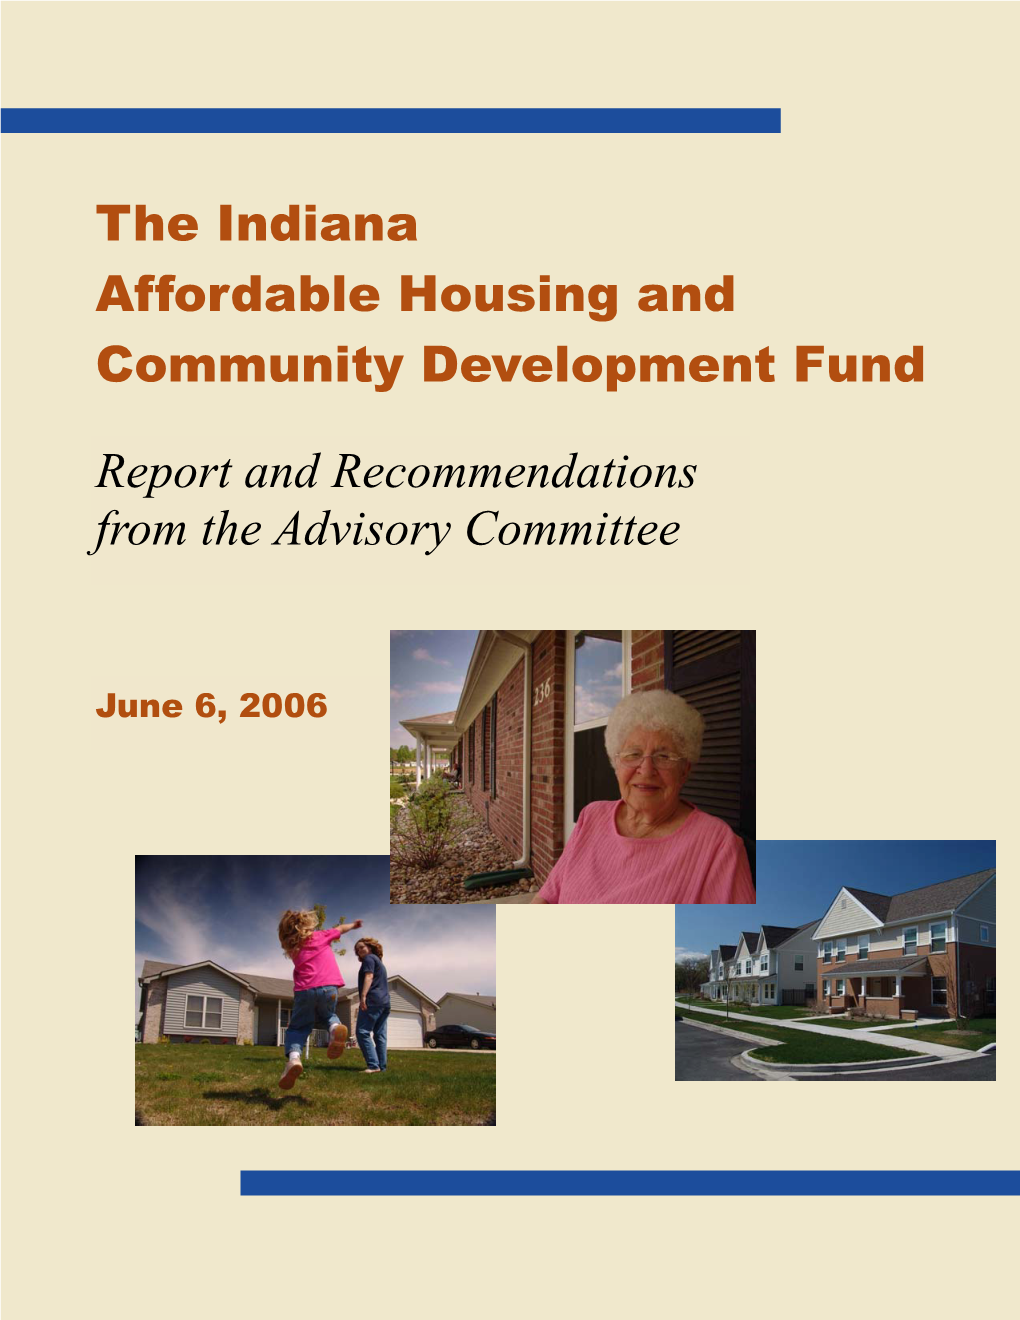 The Indiana Affordable Housing and Community Development Fund